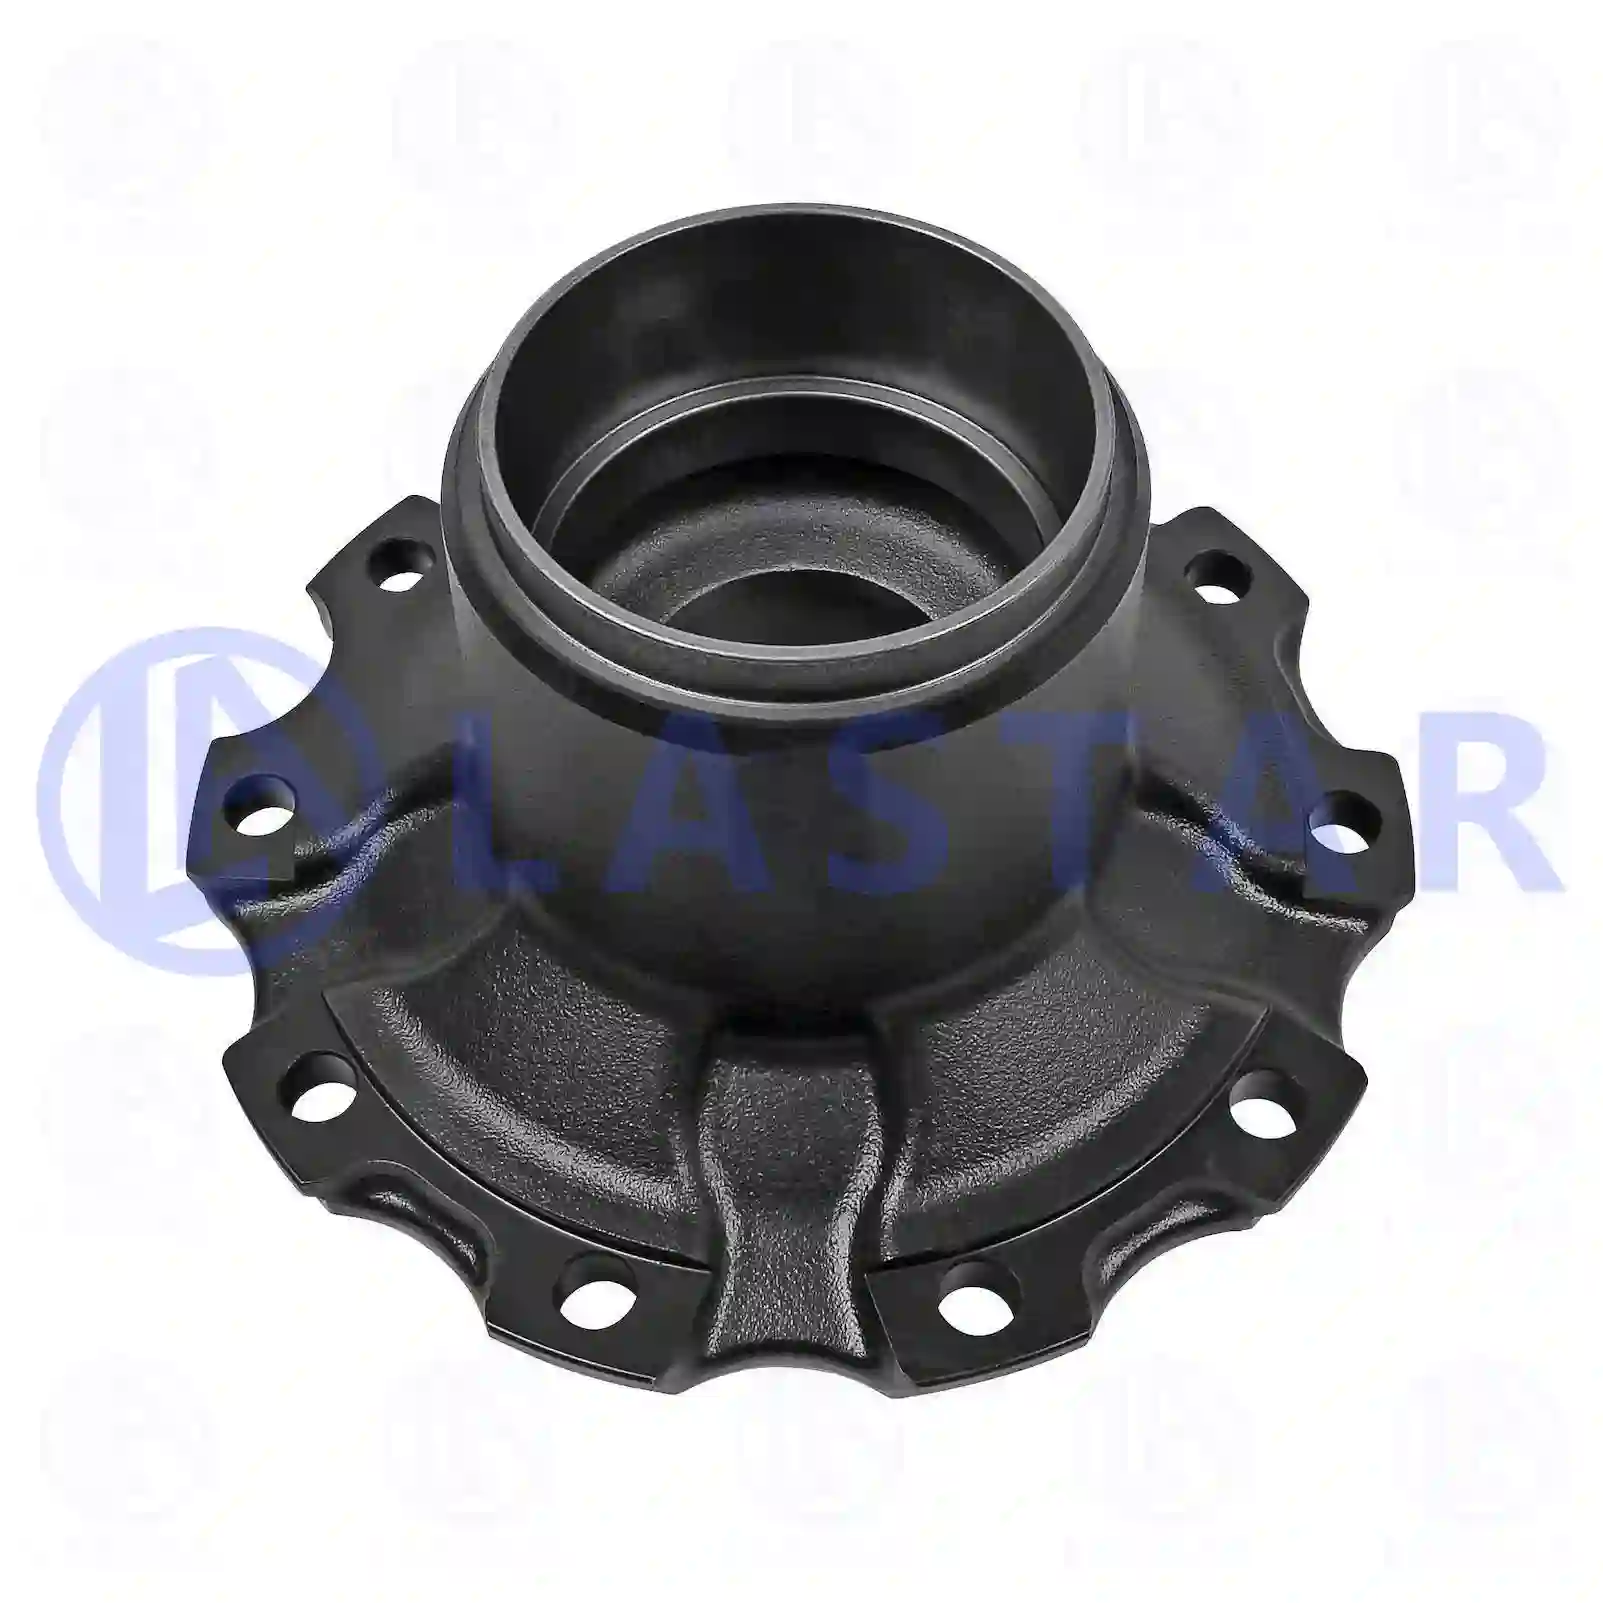 Wheel hub, without bearings, 77726371, 6243341001, ZG30232-0008, , , , , ||  77726371 Lastar Spare Part | Truck Spare Parts, Auotomotive Spare Parts Wheel hub, without bearings, 77726371, 6243341001, ZG30232-0008, , , , , ||  77726371 Lastar Spare Part | Truck Spare Parts, Auotomotive Spare Parts